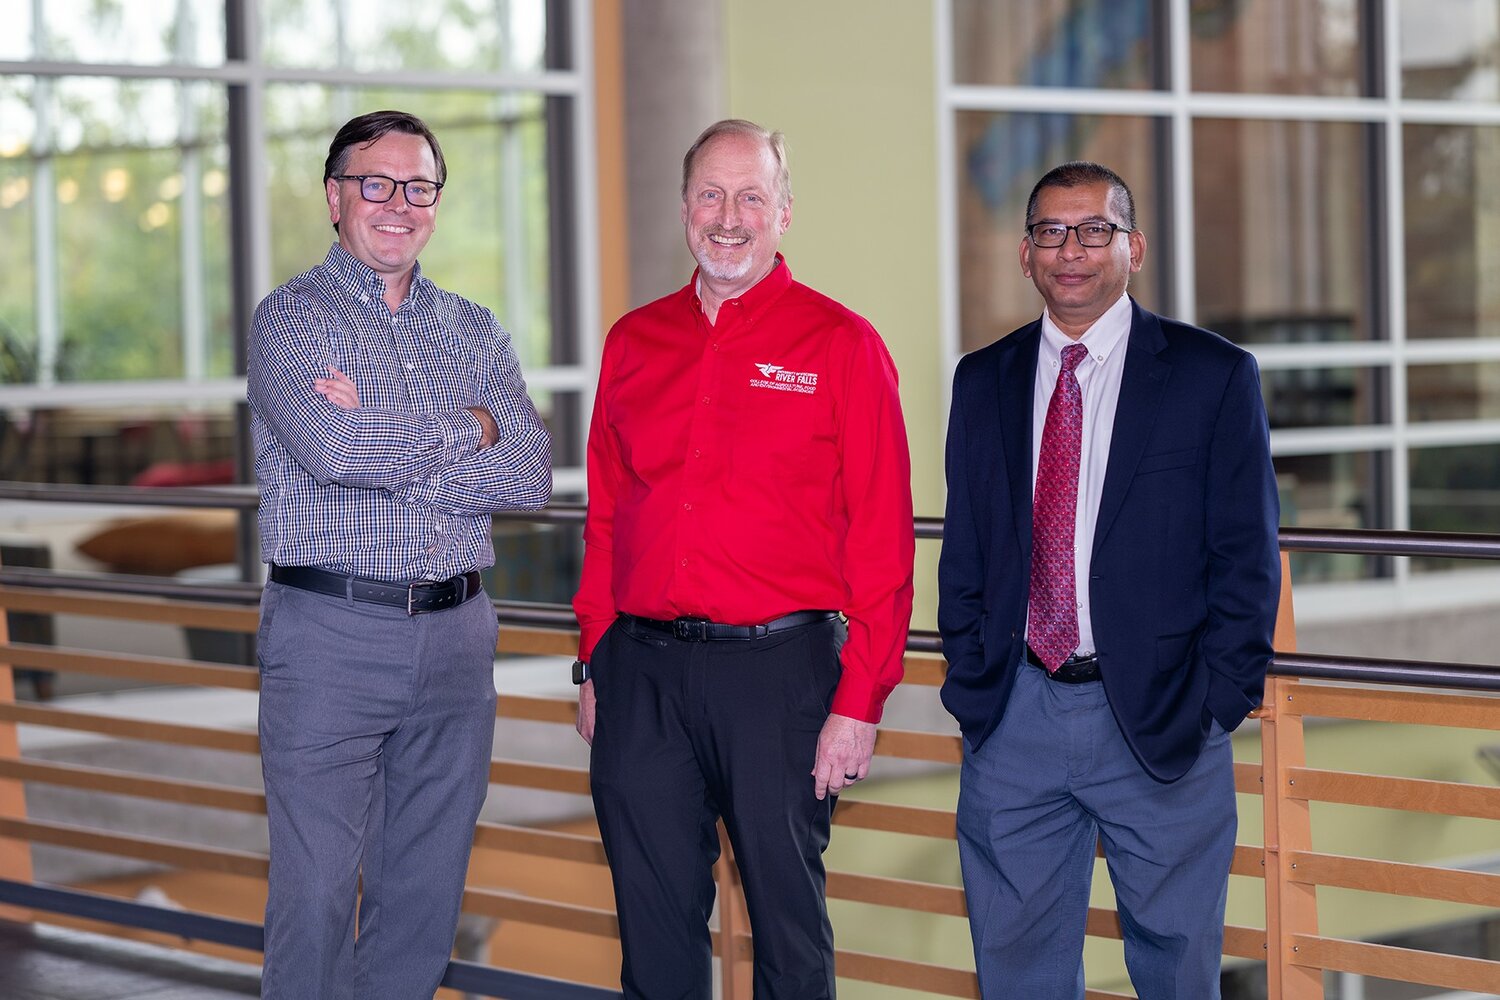 All three of the colleges at UW-River Falls have a new dean this academic year. From left, Dean of the College of Arts and Sciences (CAS) Wesley Kisting; Dean of the College of Agriculture, Food and Environmental Sciences (CAFES) Michael Orth; and Dean of the College of Education, Business and Allied Health (CEBAH) Muhammad Chishty.